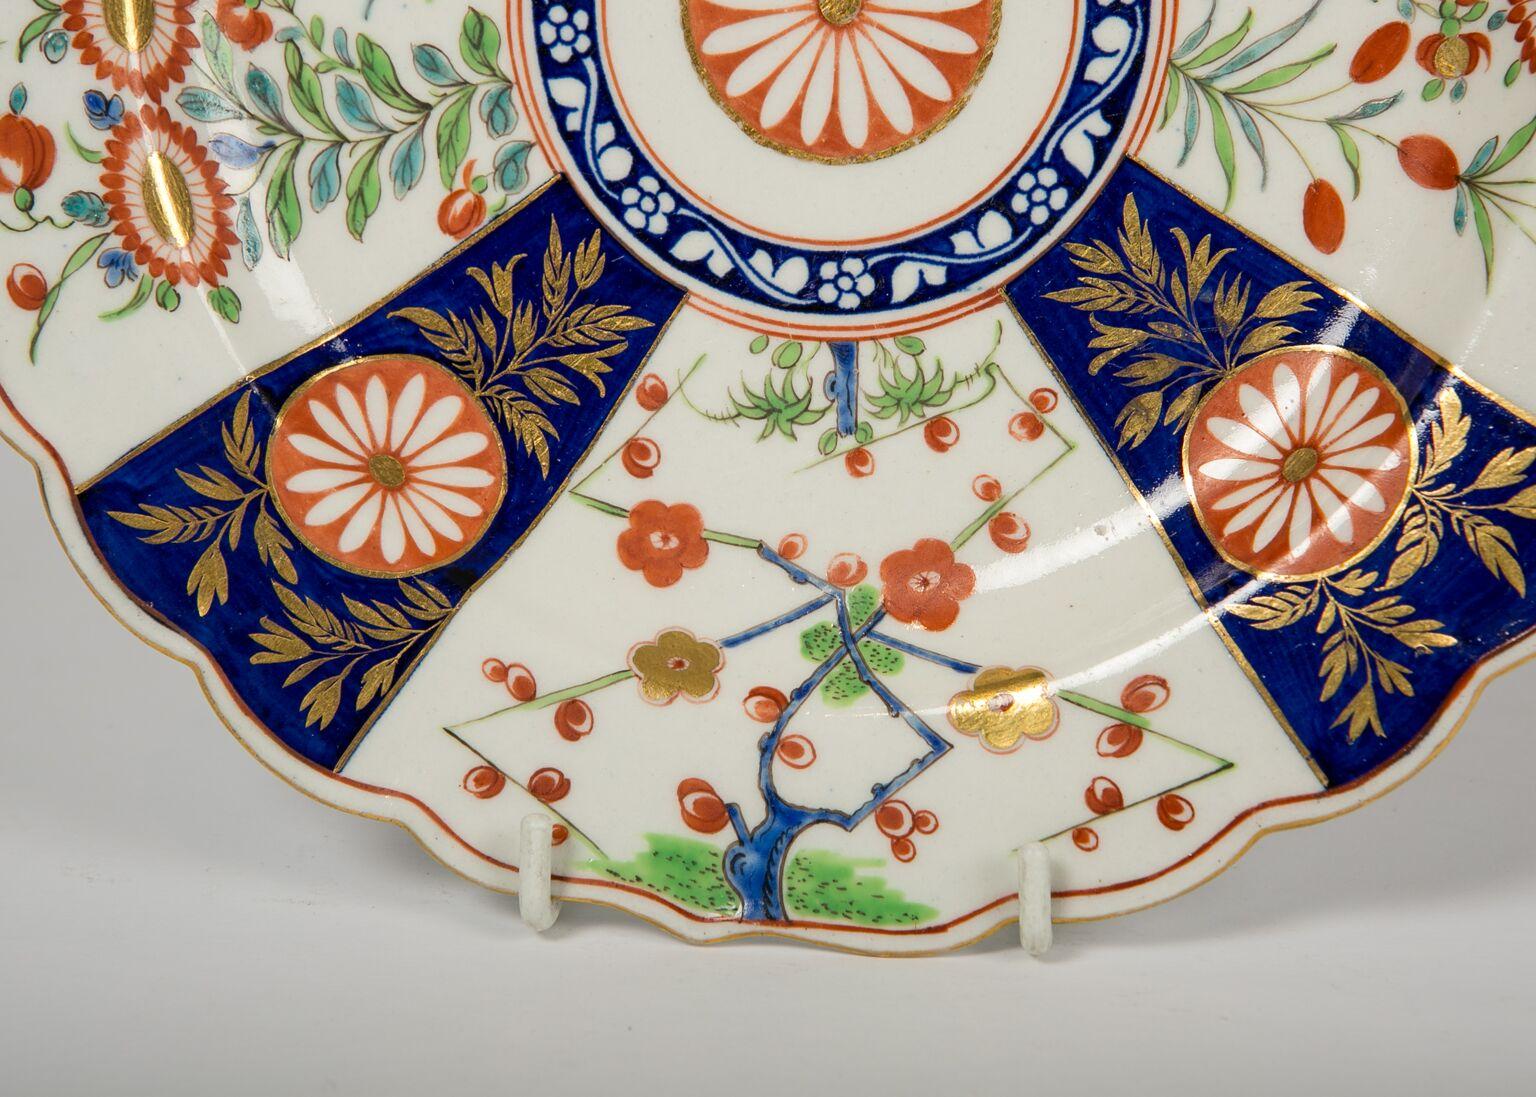 Enameled Pair 18th Century Worcester Porcelain Dishes First Period Worcester circa 1770